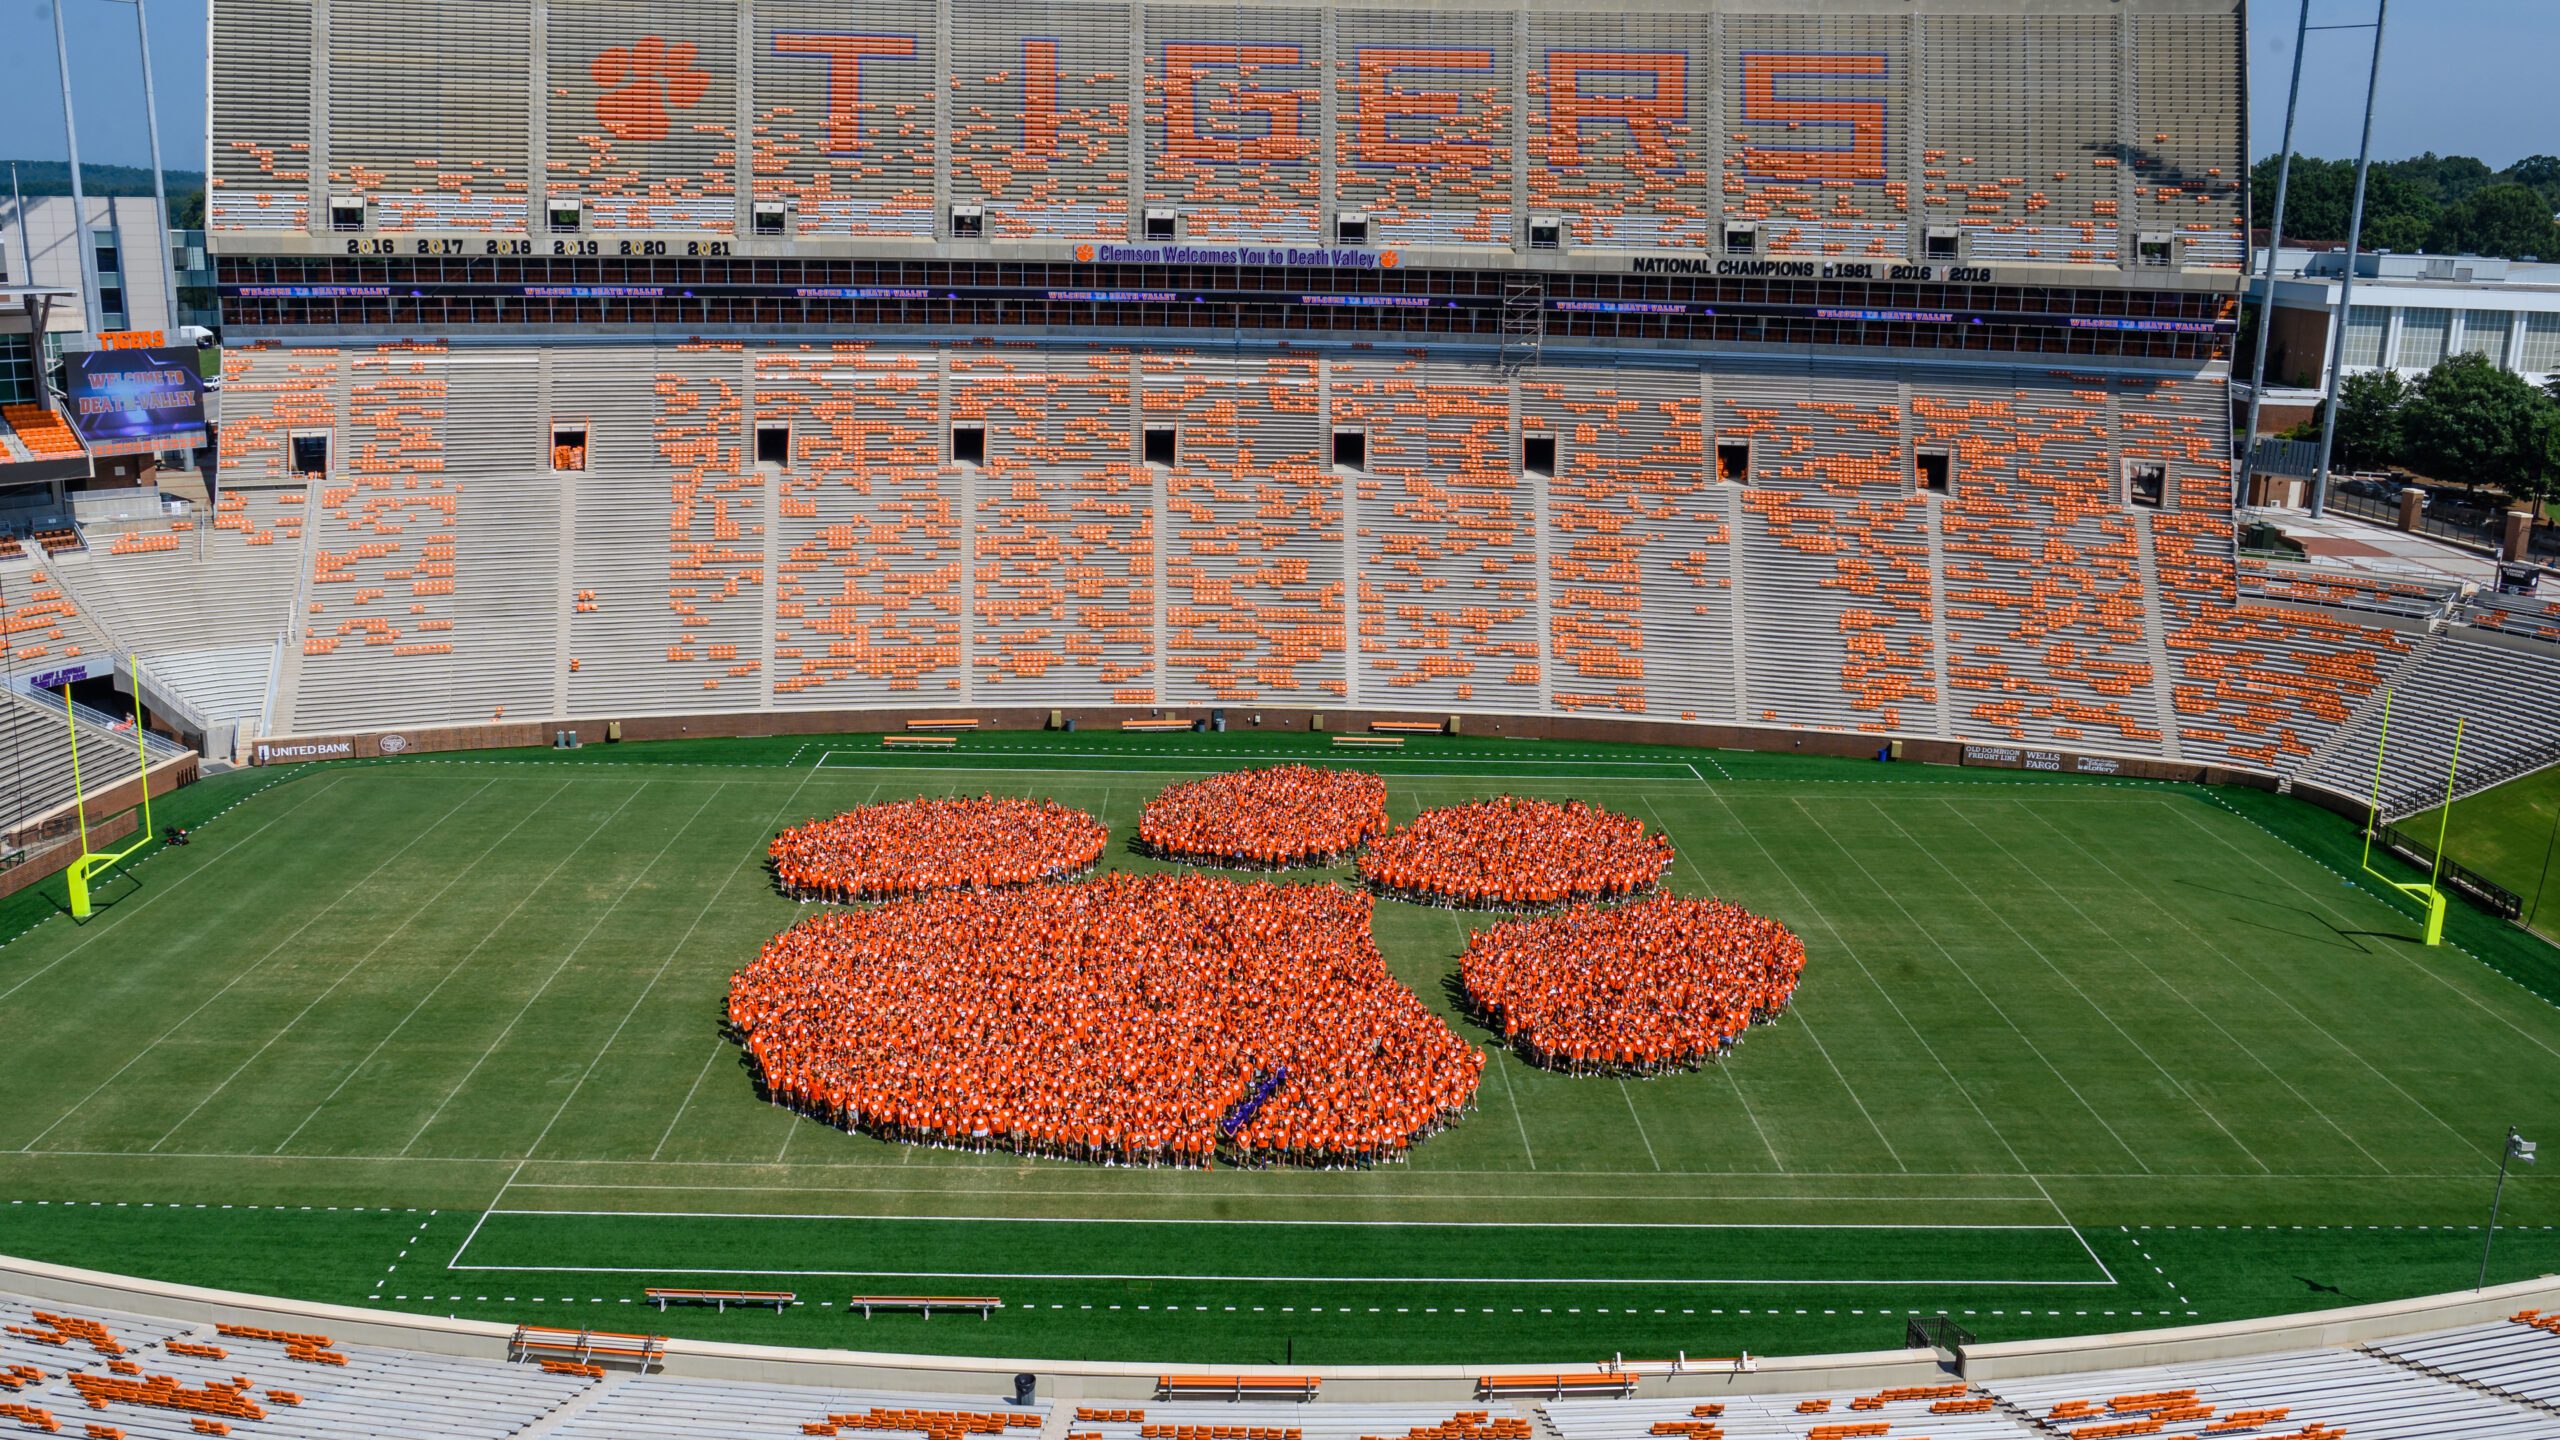 Members of the Class of 2027 make up the iconic Tiger Paw logo at midfield of Memorial Stadium